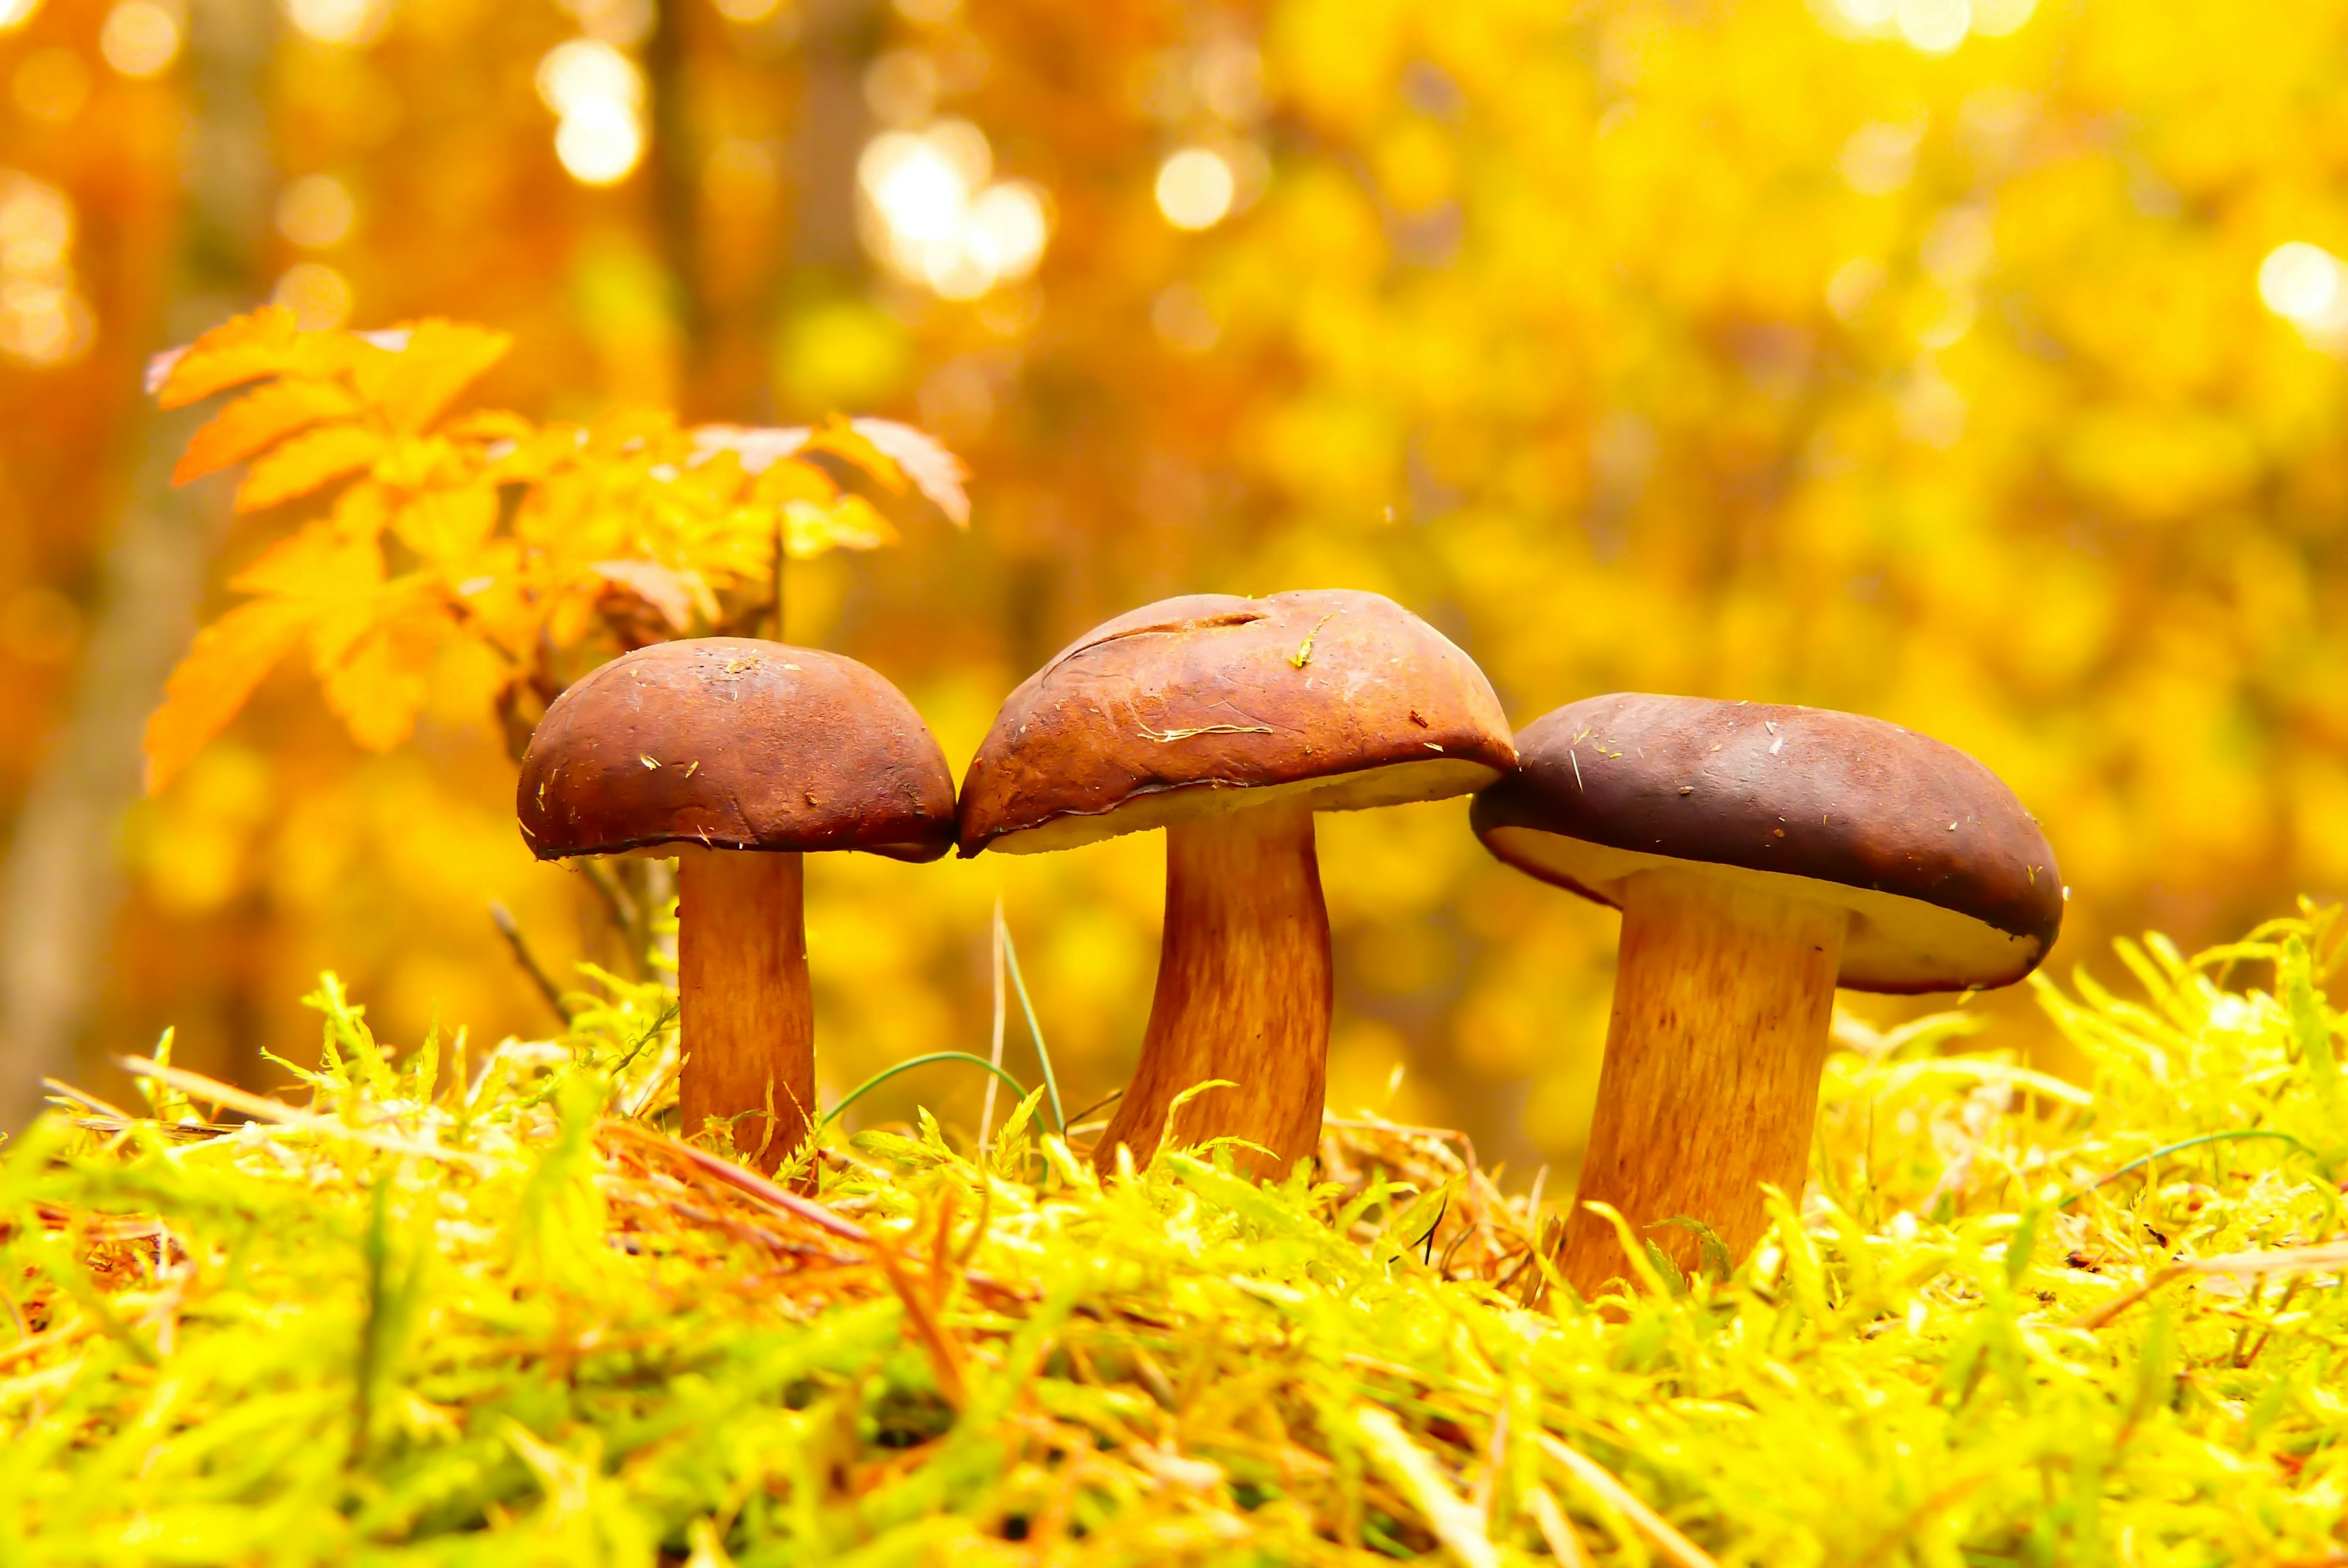 three mushrooms lined up against yellow leaves